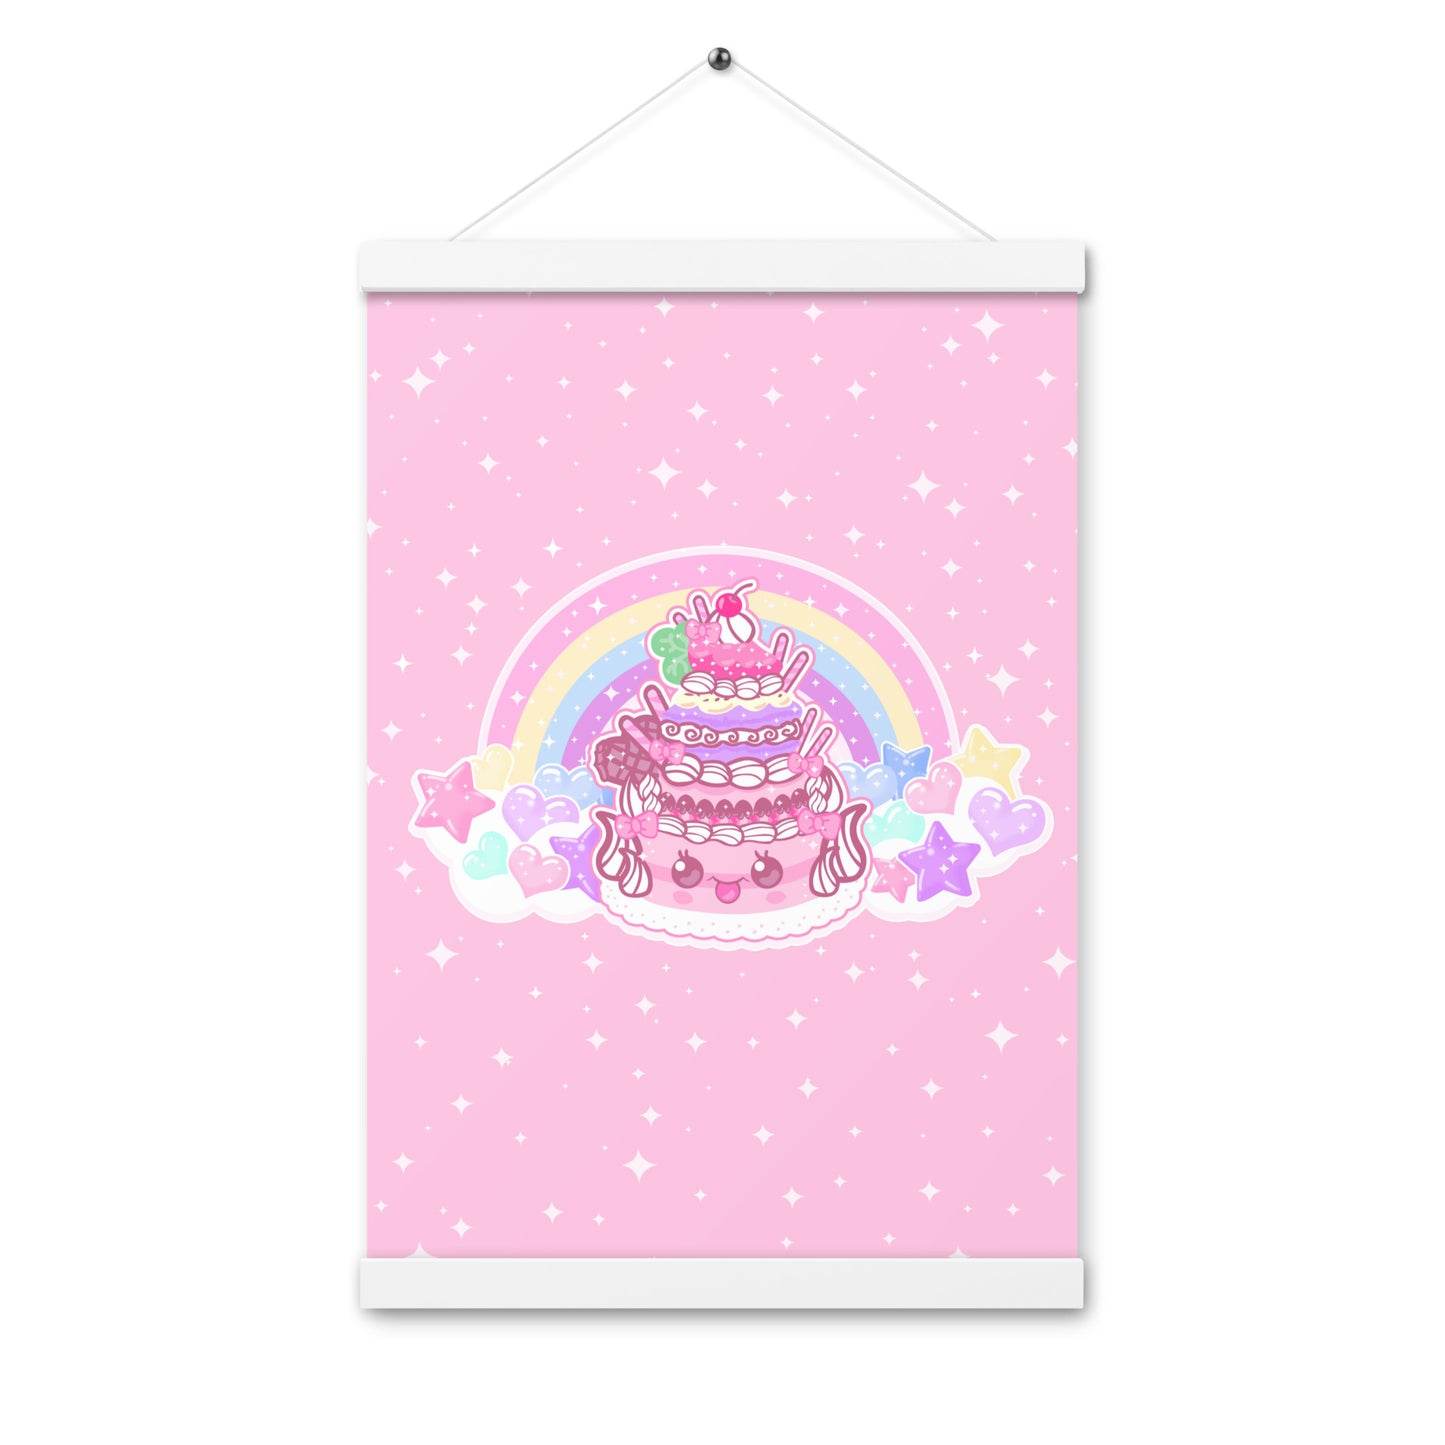 Kawaii Sparkle Cake Poster with wooden detail